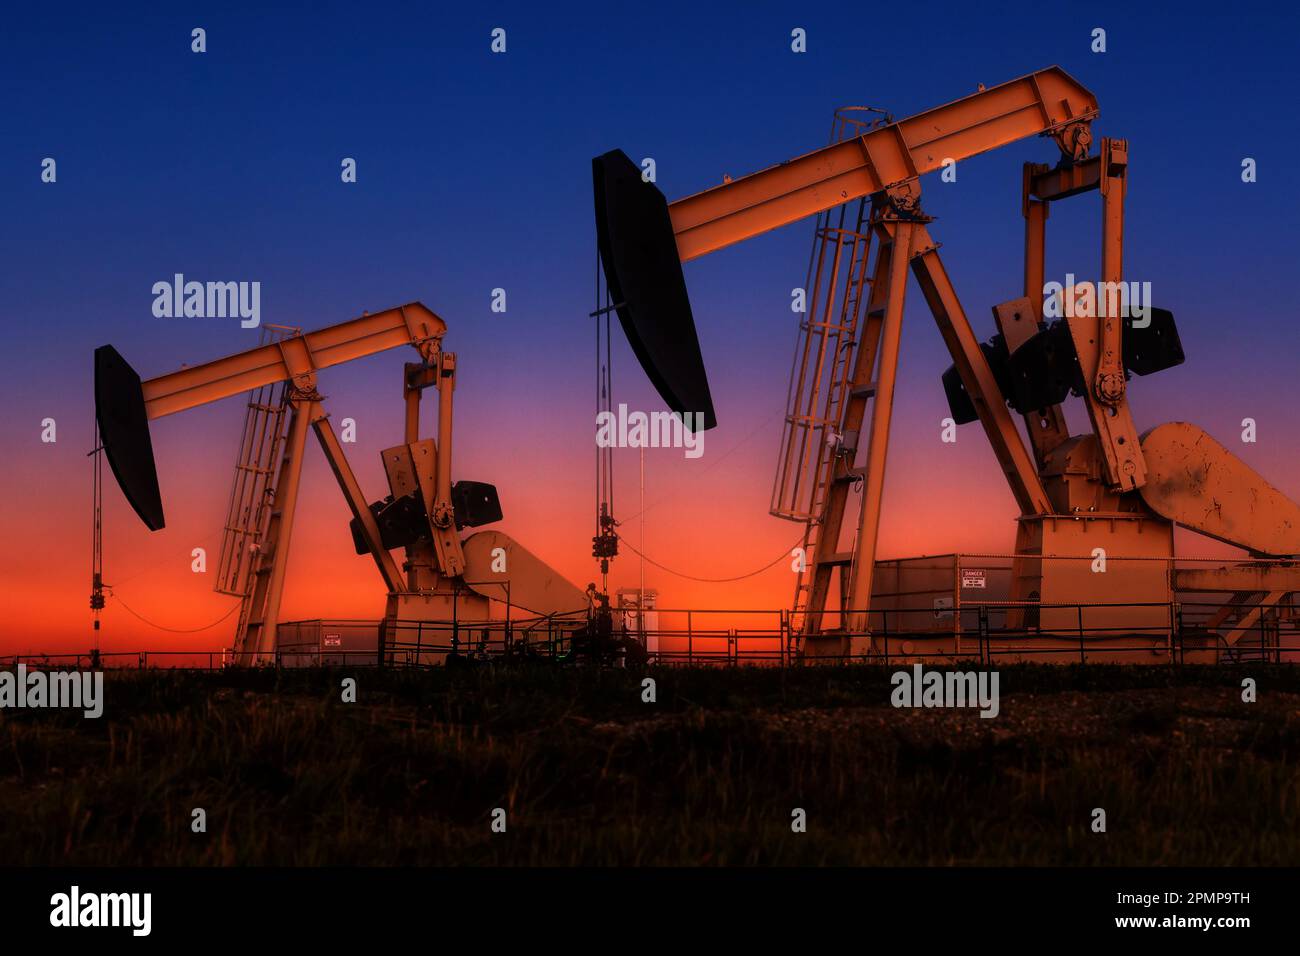 Glowing colourful pumpjacks at sunrise with glowing sky in the background, West of Airdrie; Alberta, Canada Stock Photo